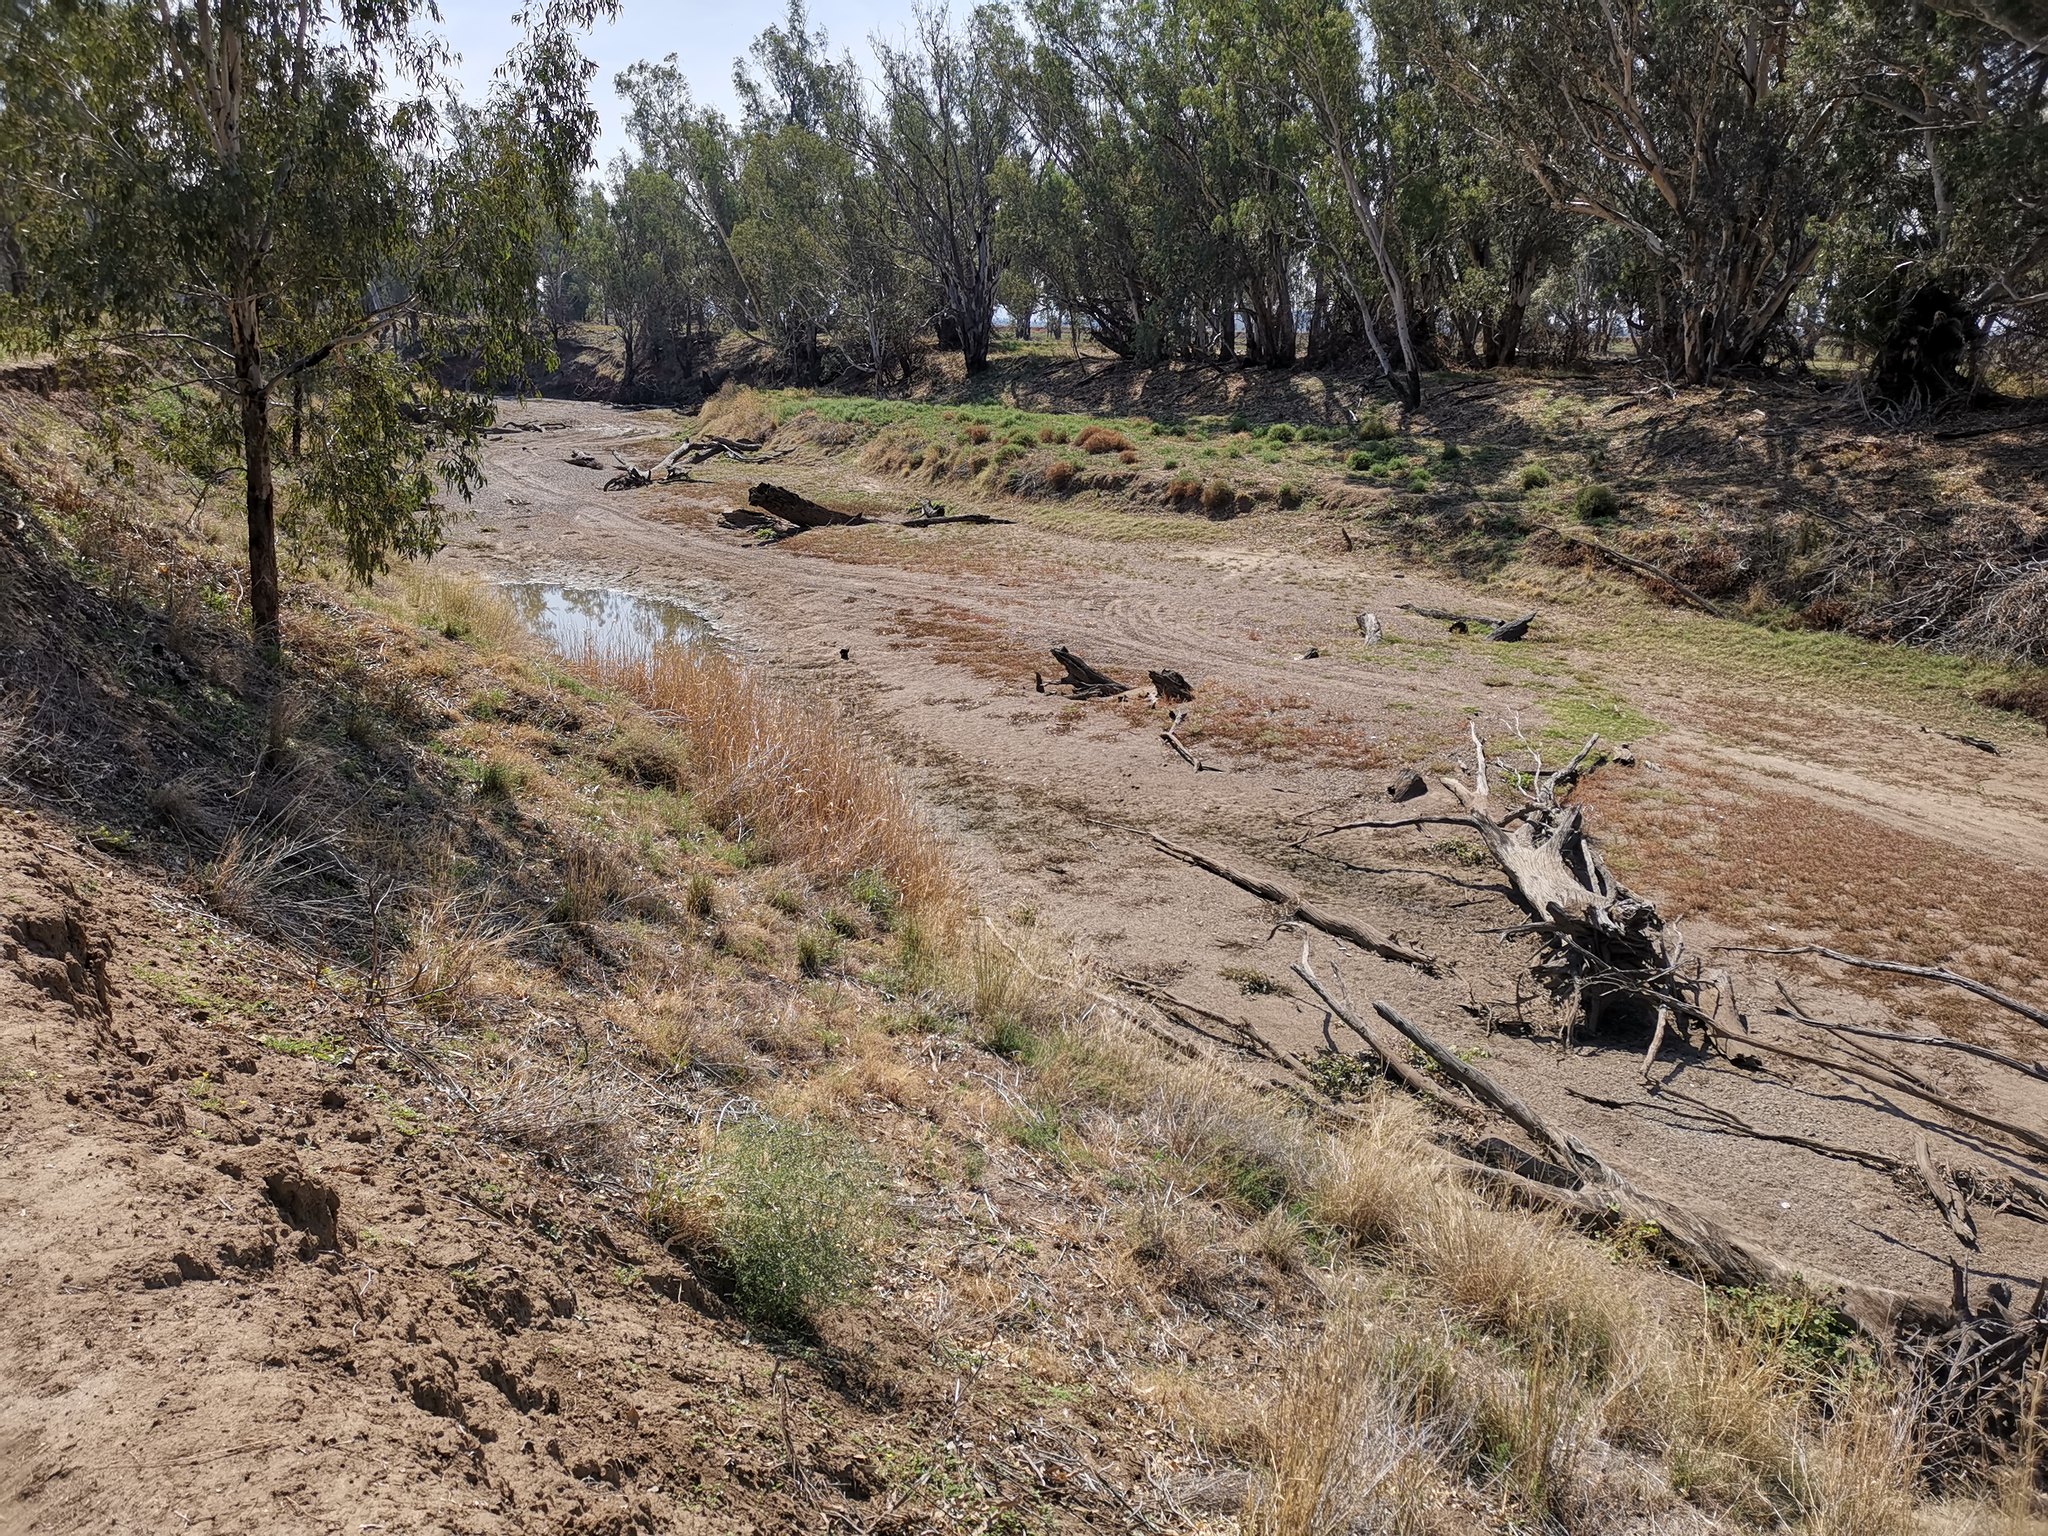 This section of the Namoi River, south of Boggabri, was dry. You can see that a motor vehicle has driven along the riverbed. Photo credit: Michael Cleary/flickr